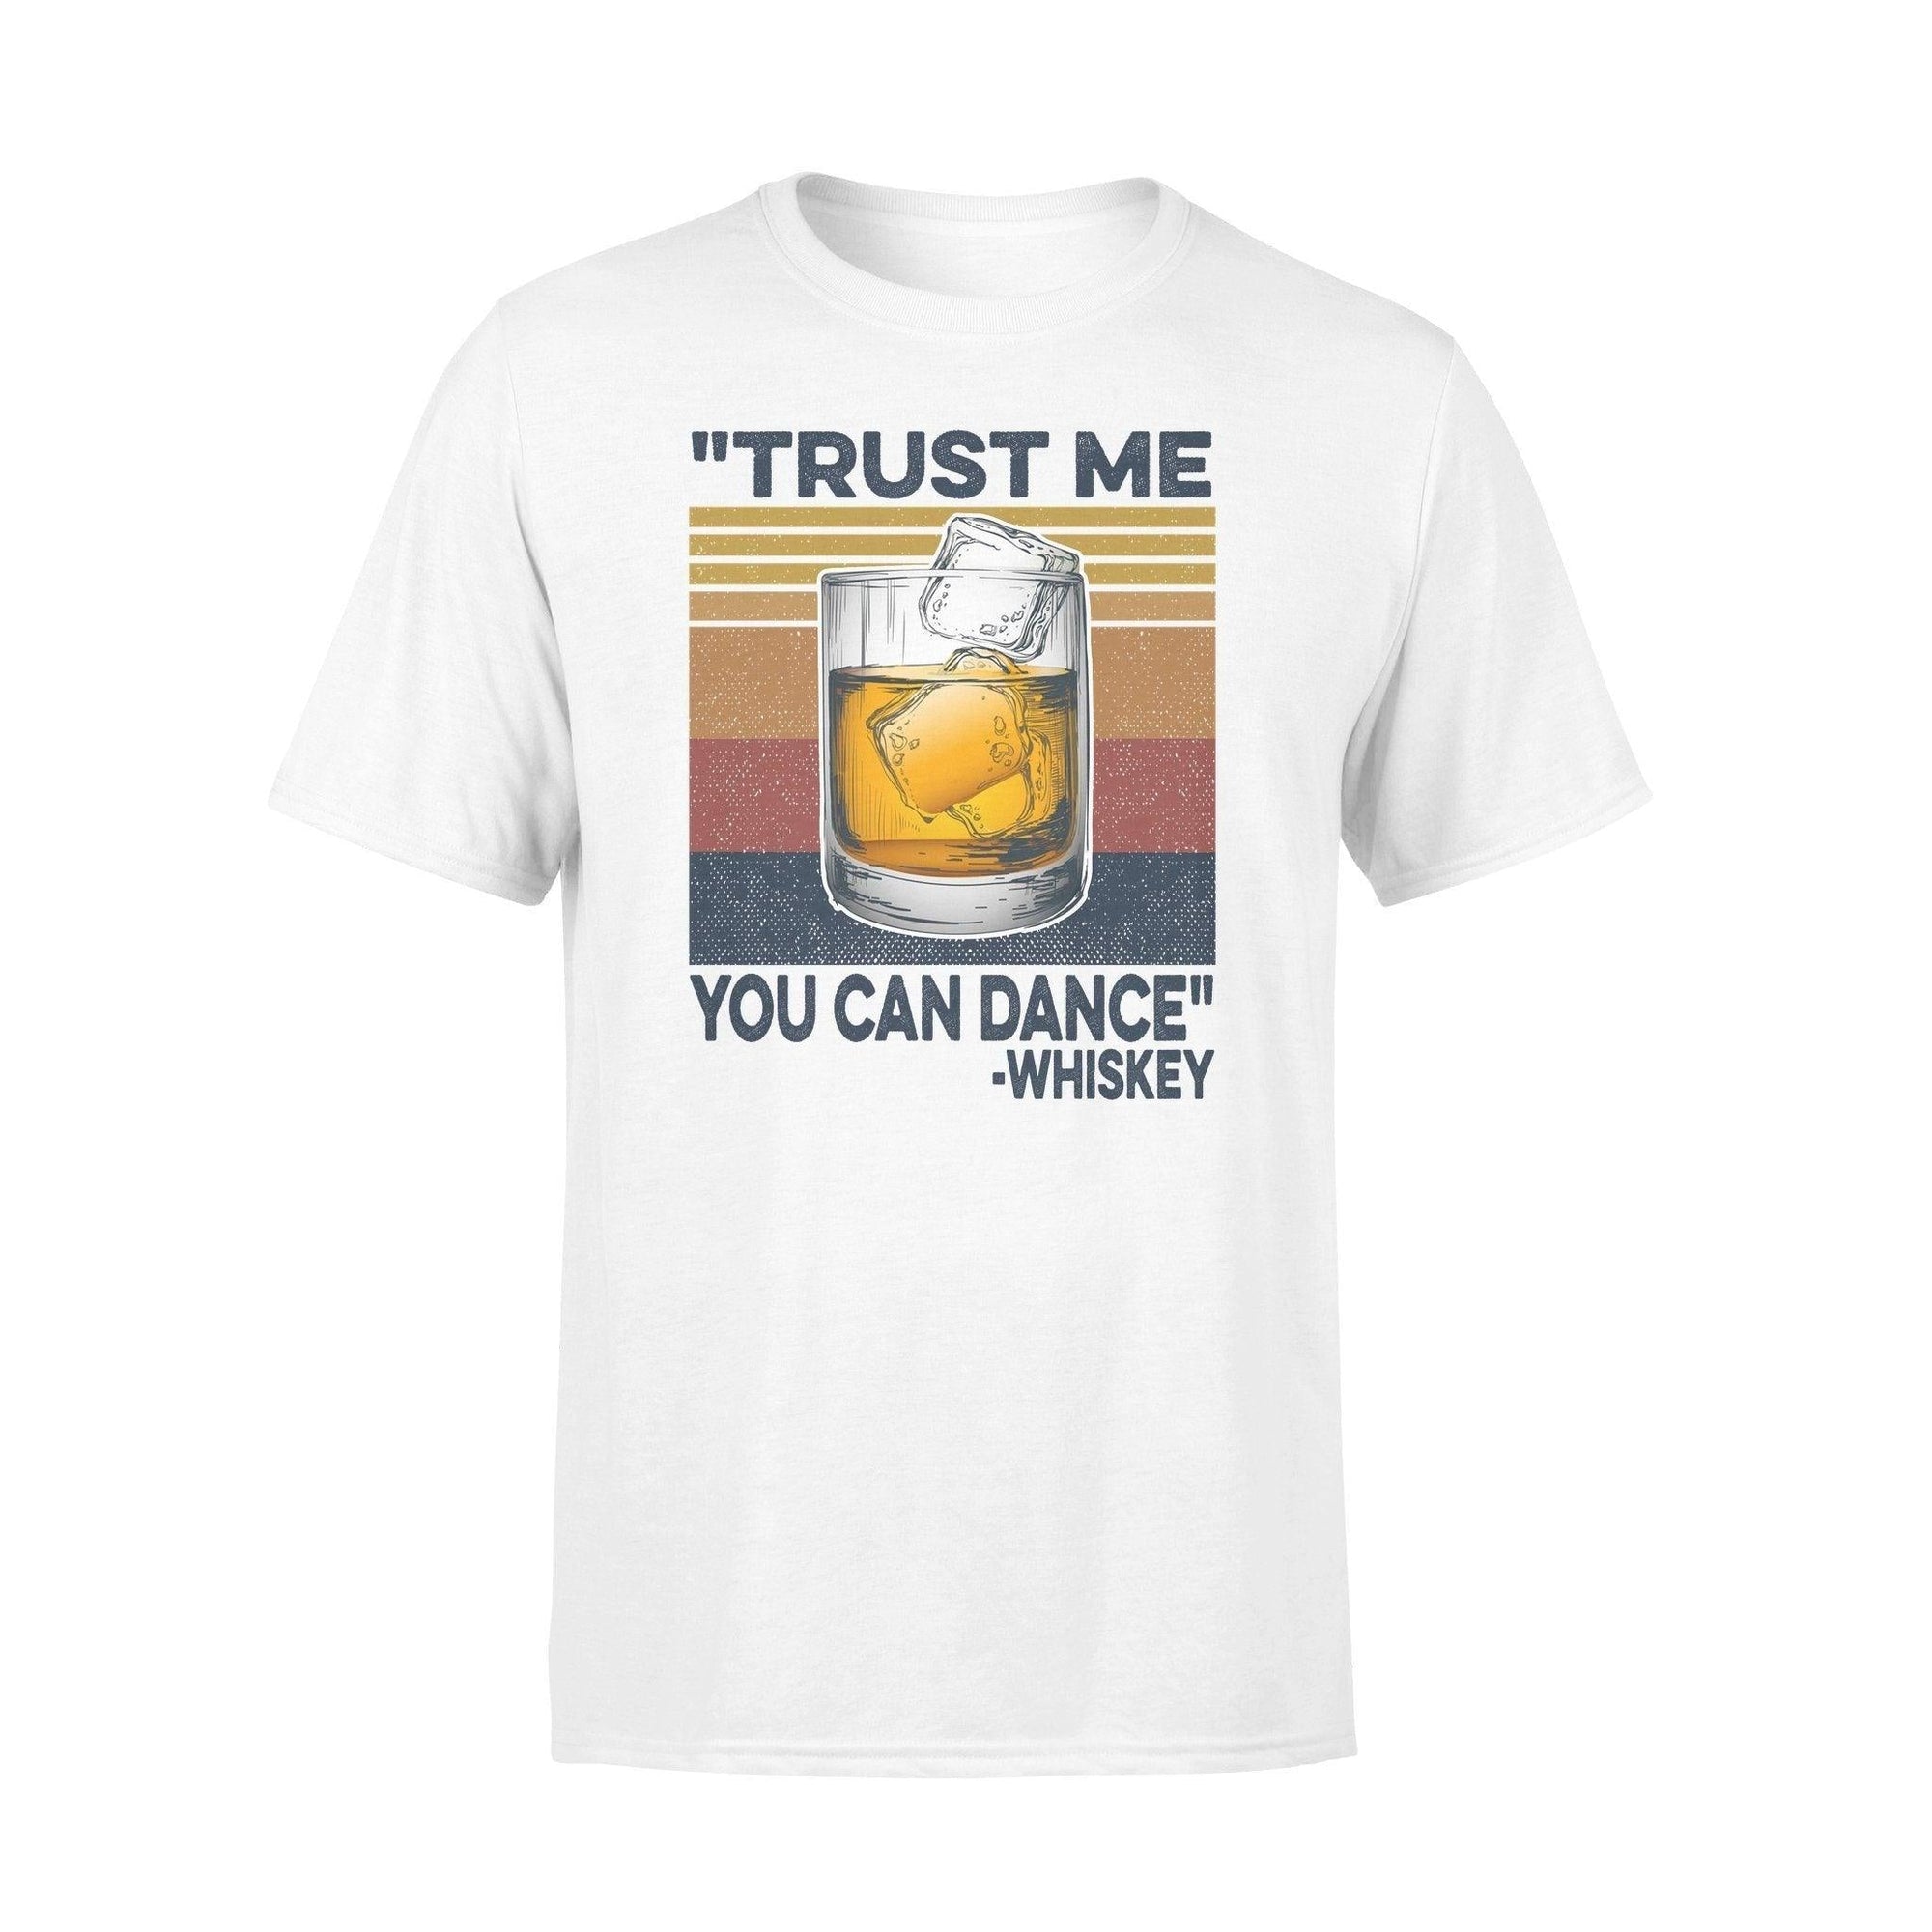 Whiskey Trust Me You Can Dance - Standard T-shirt - PERSONAL84